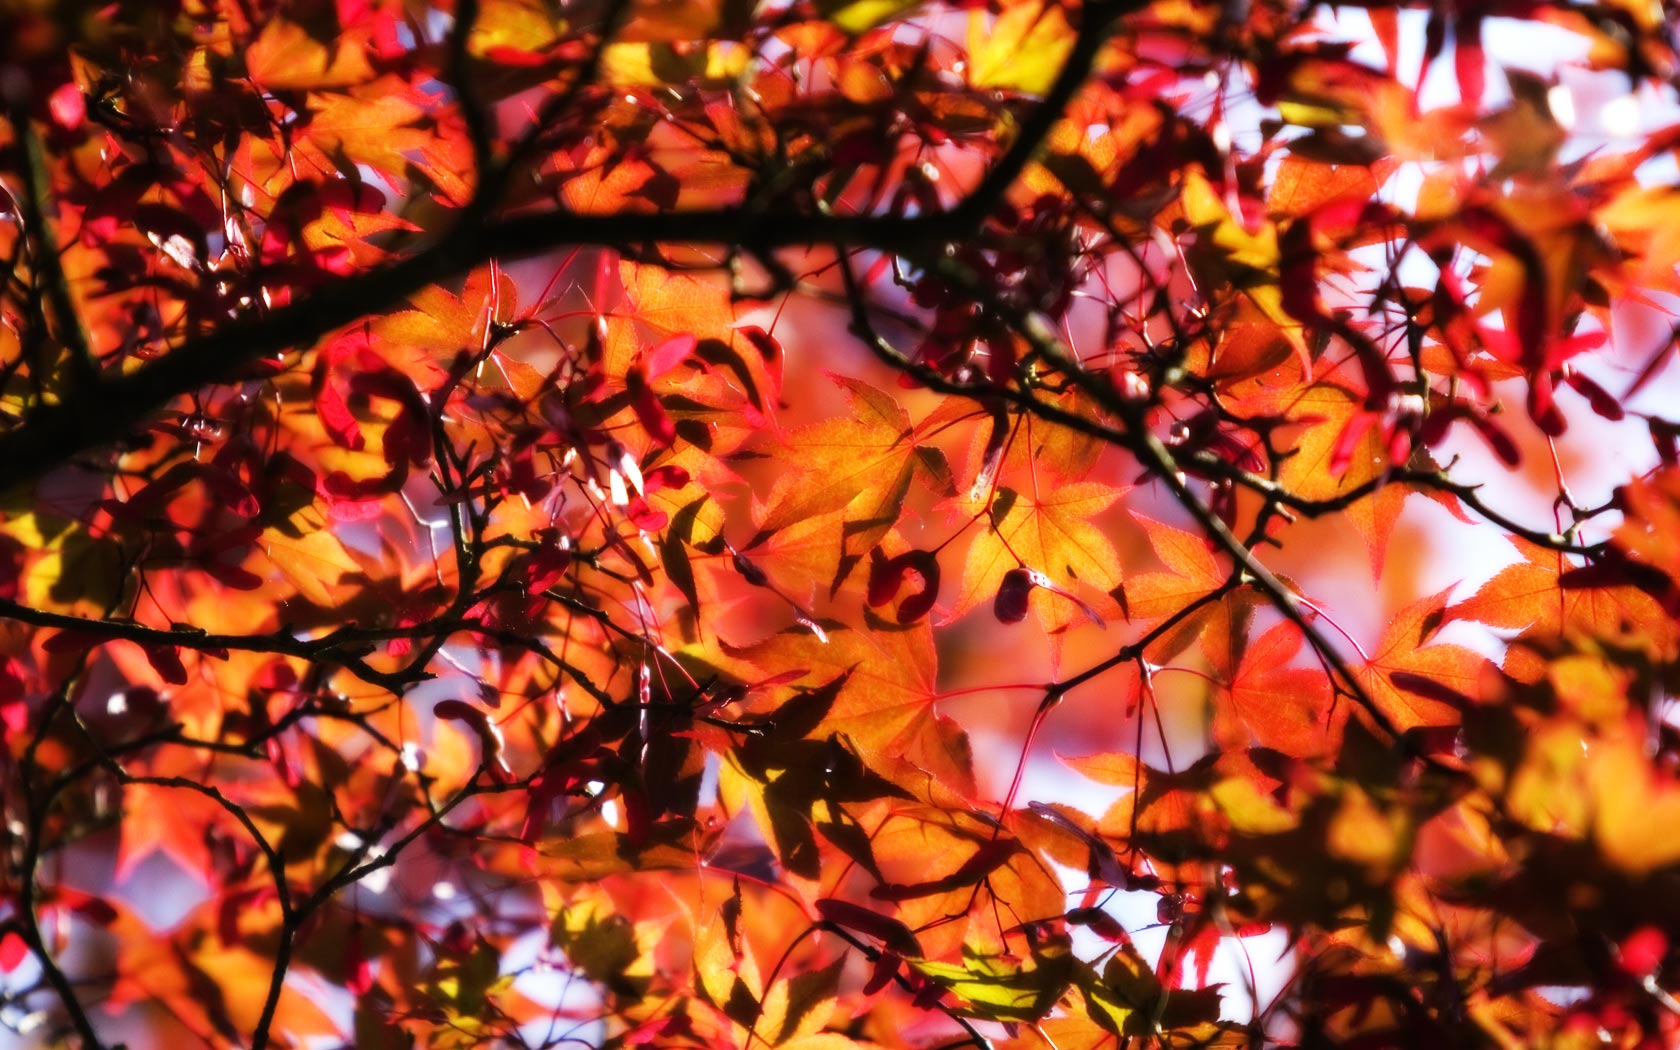 Cool Autumn Background Wallpaper At GetHDpic